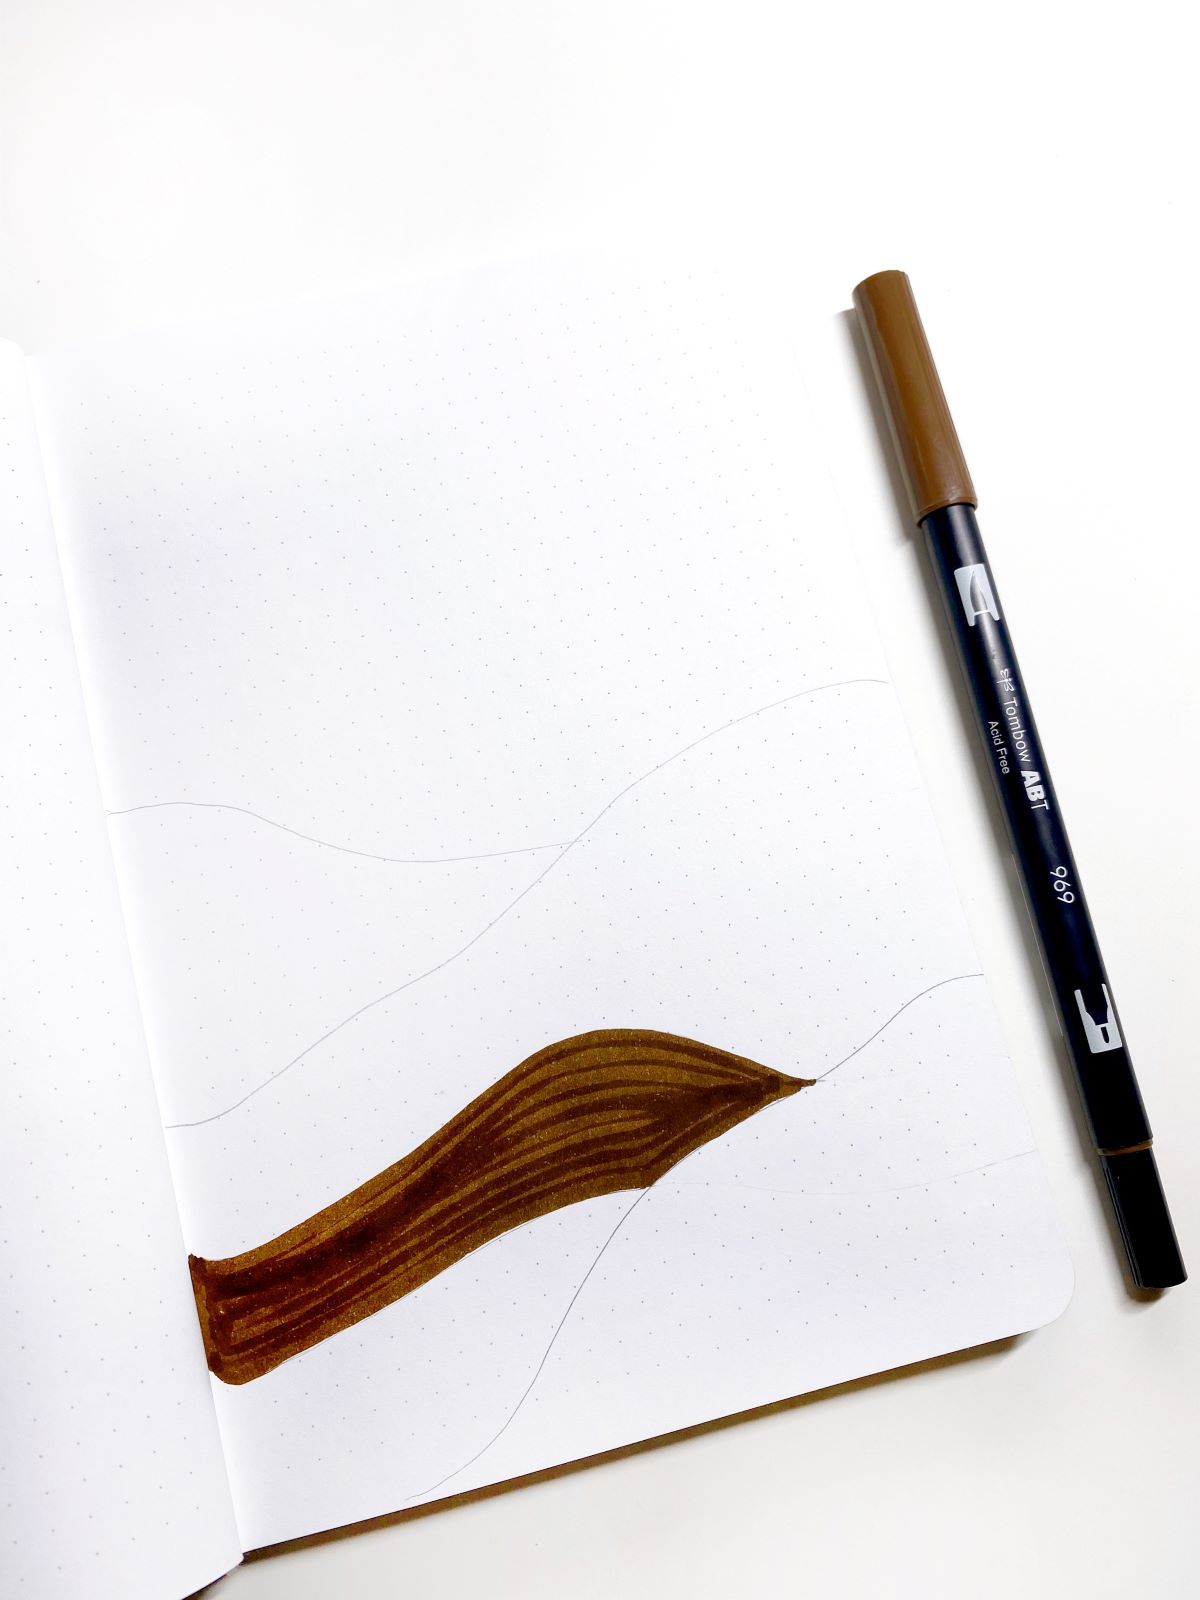 Create a Coffee Inspired Art Journal Page With Tombow! #tombow #artjournal